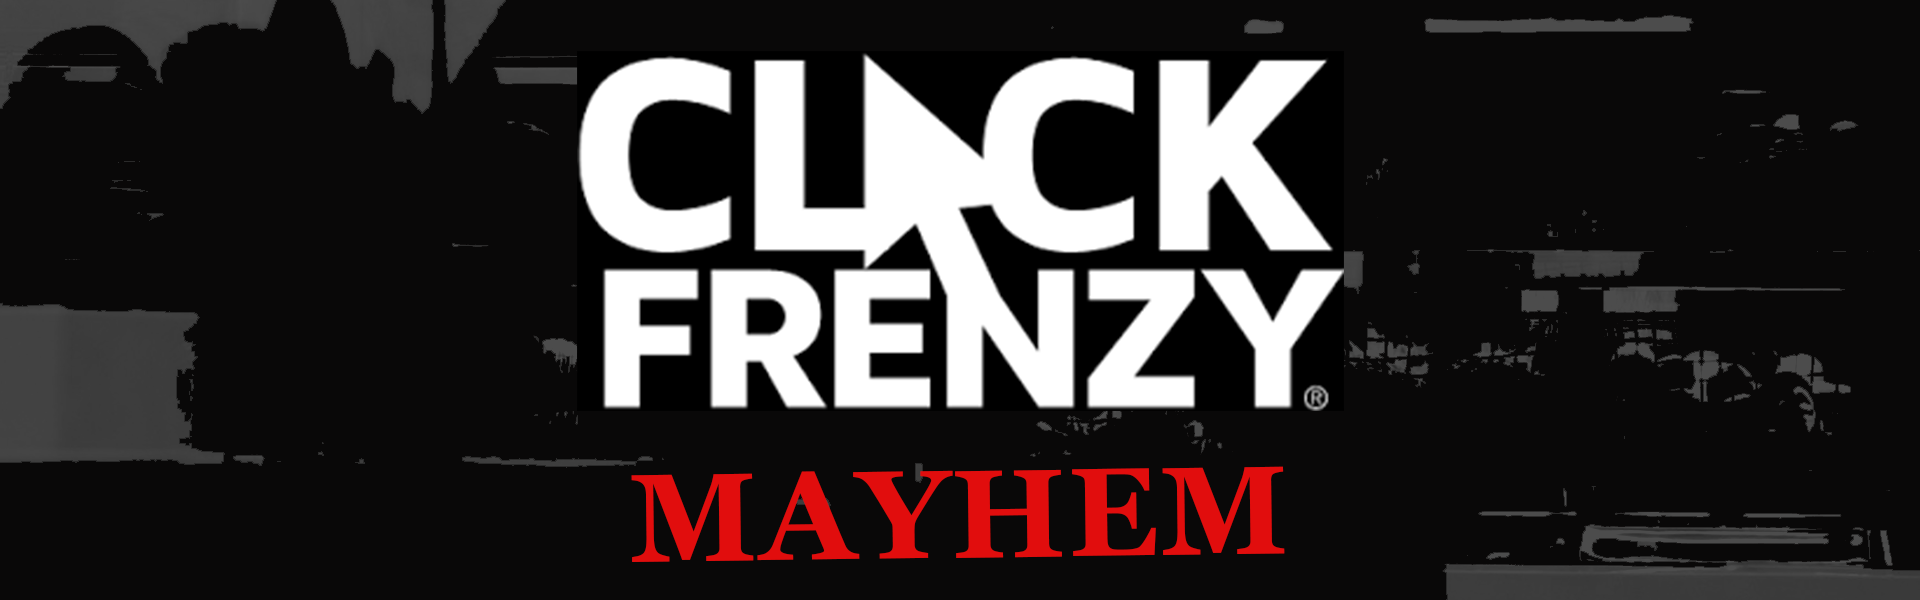 click-frenzy.png